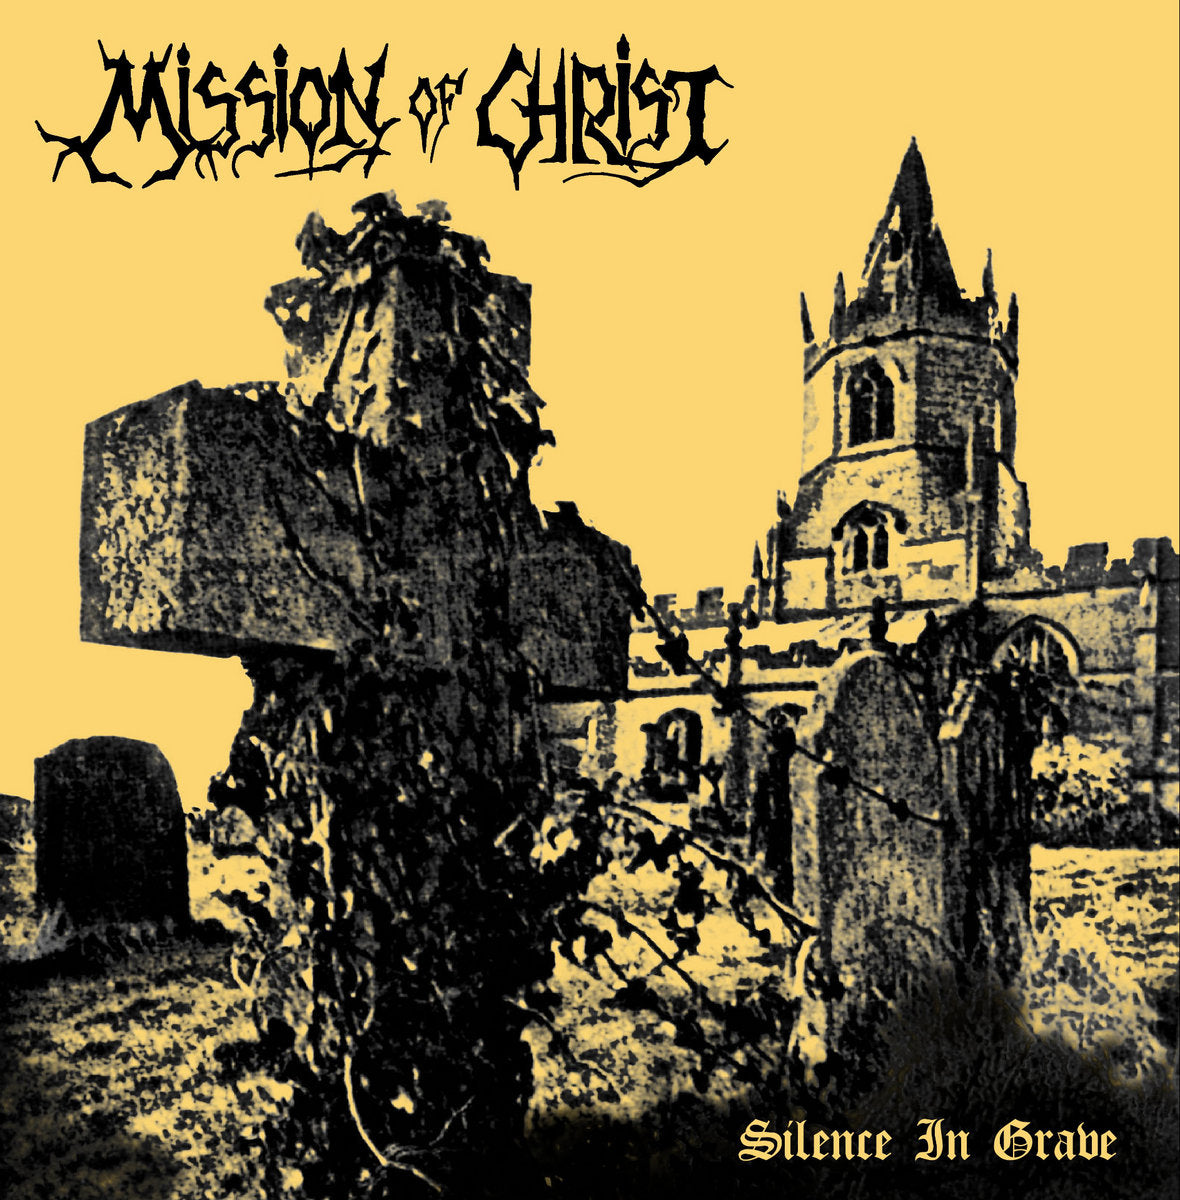 Mission Of Christ "Silence In Grave (1987-89)" LP + "Realms Of Evil" 7"